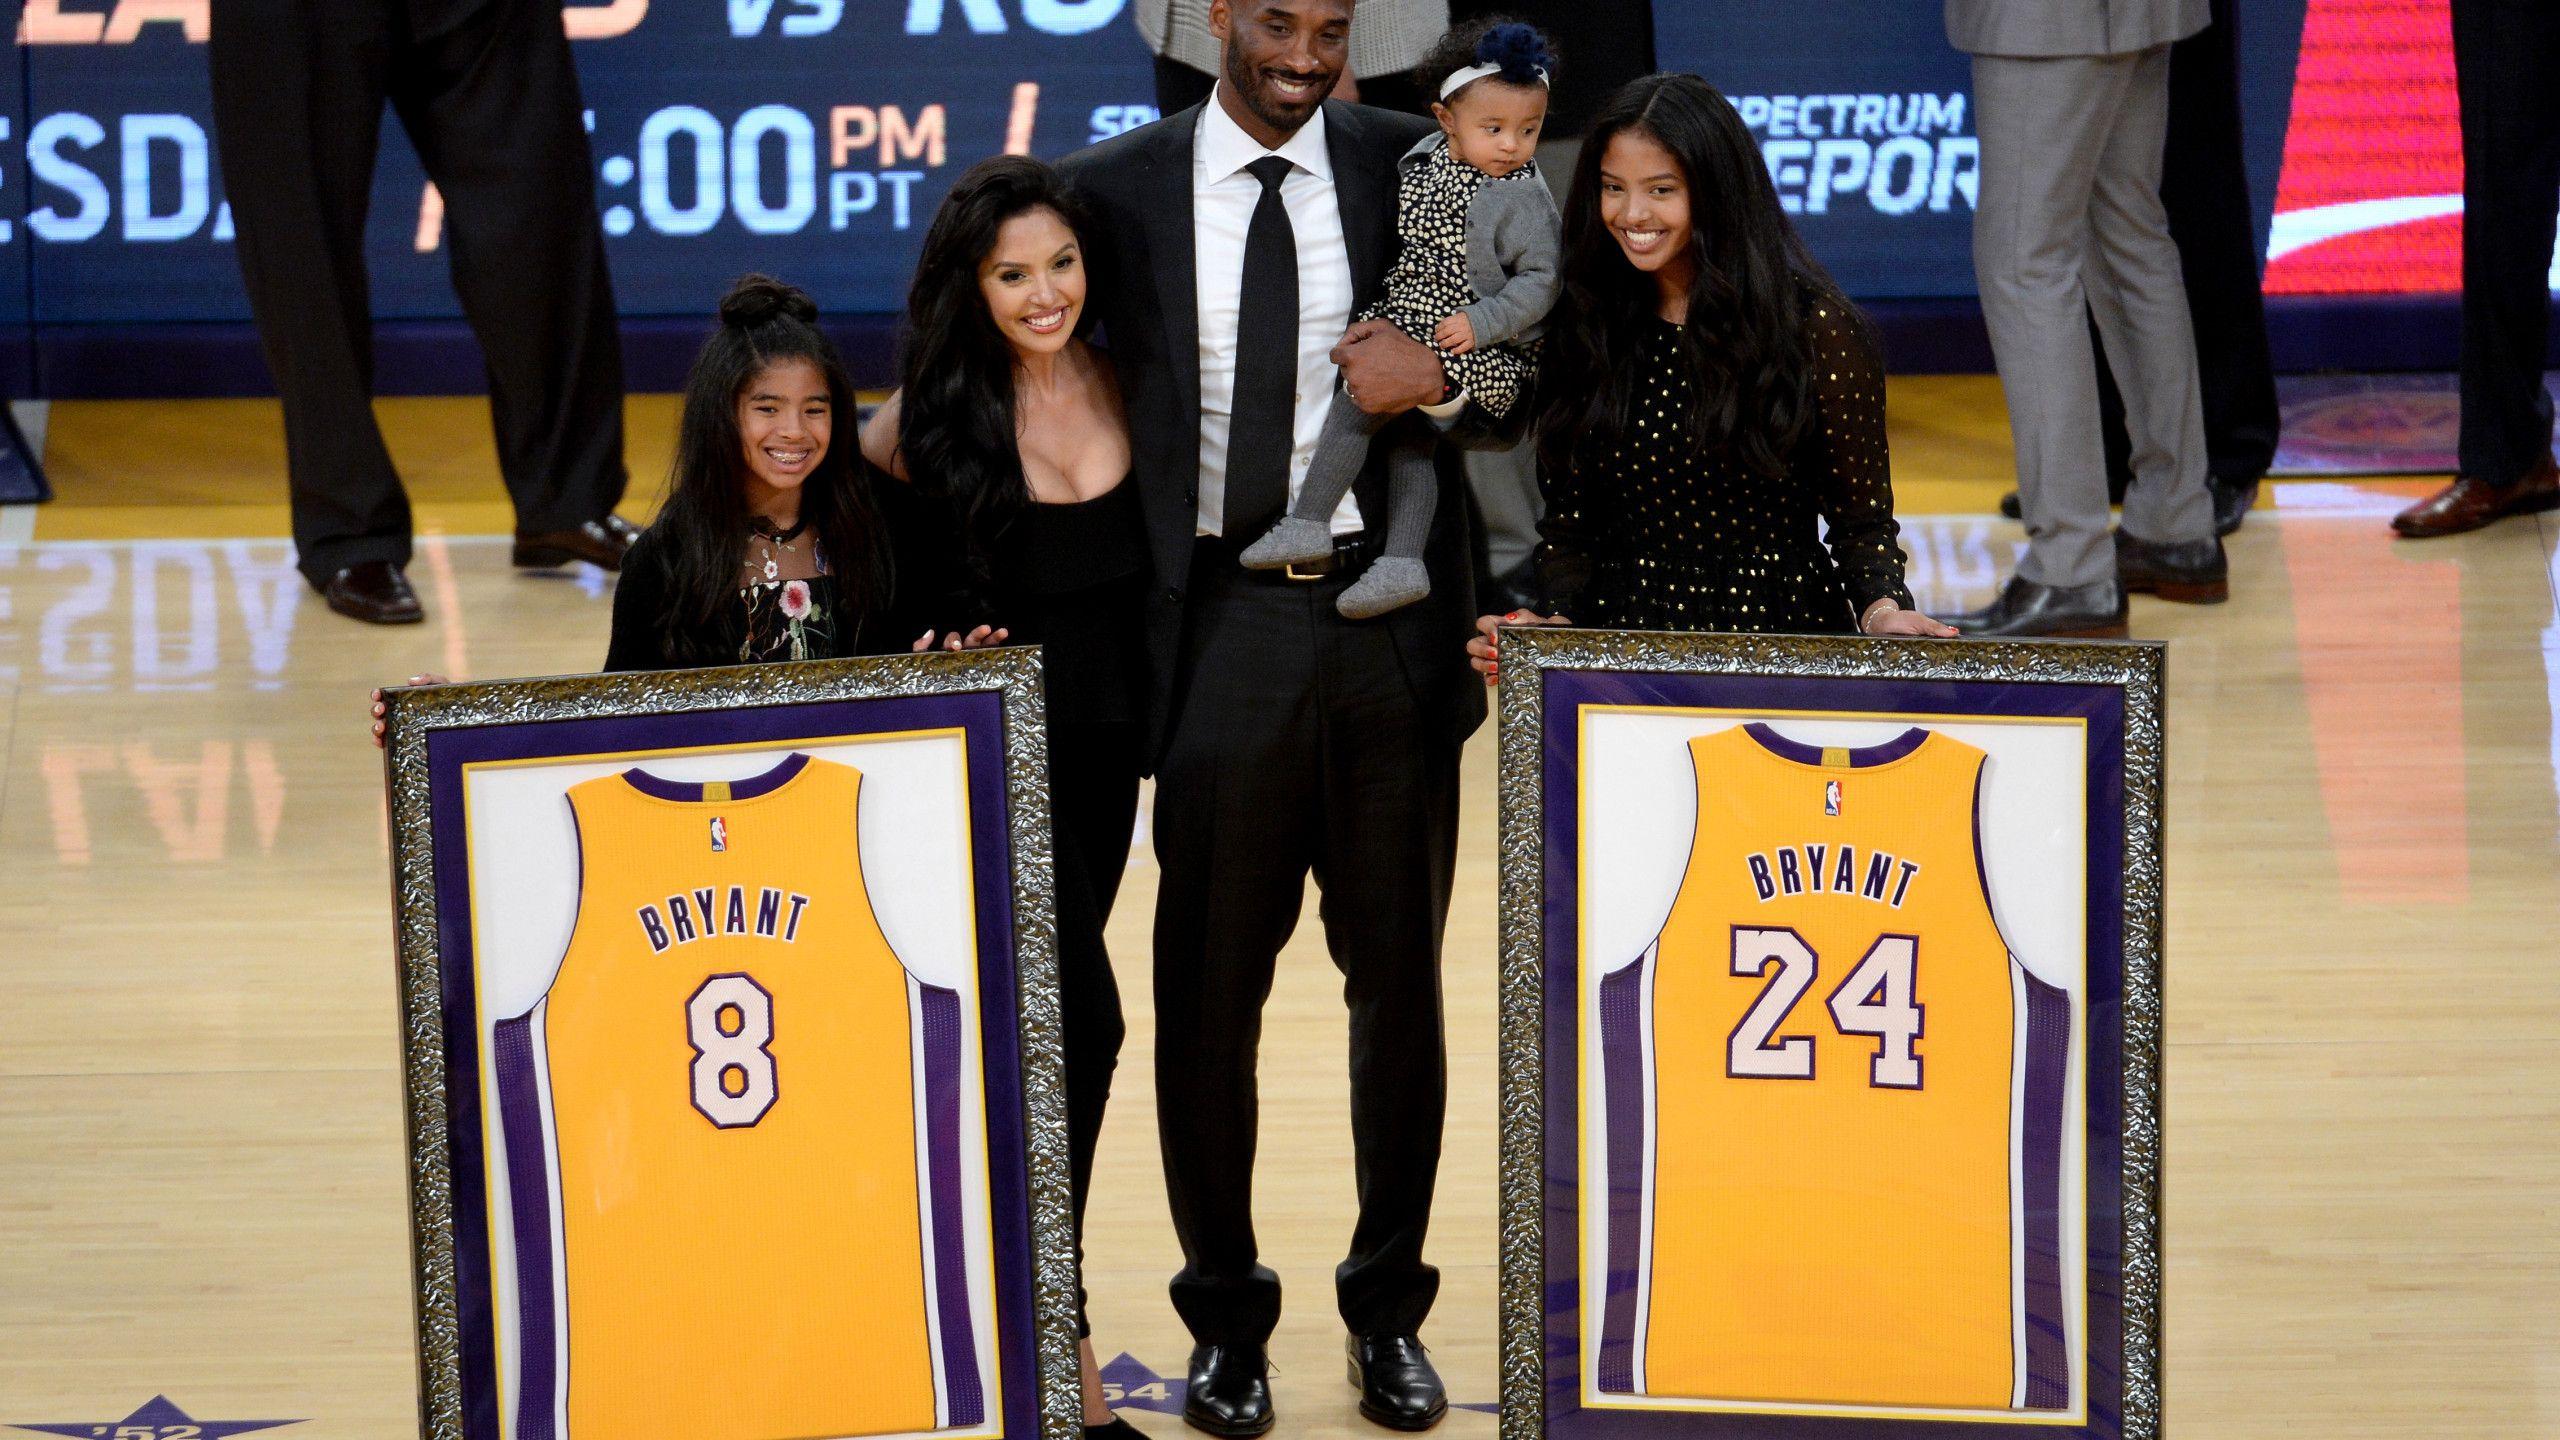 Kobe Bryant to be posthumously inducted into Basketball Hall of